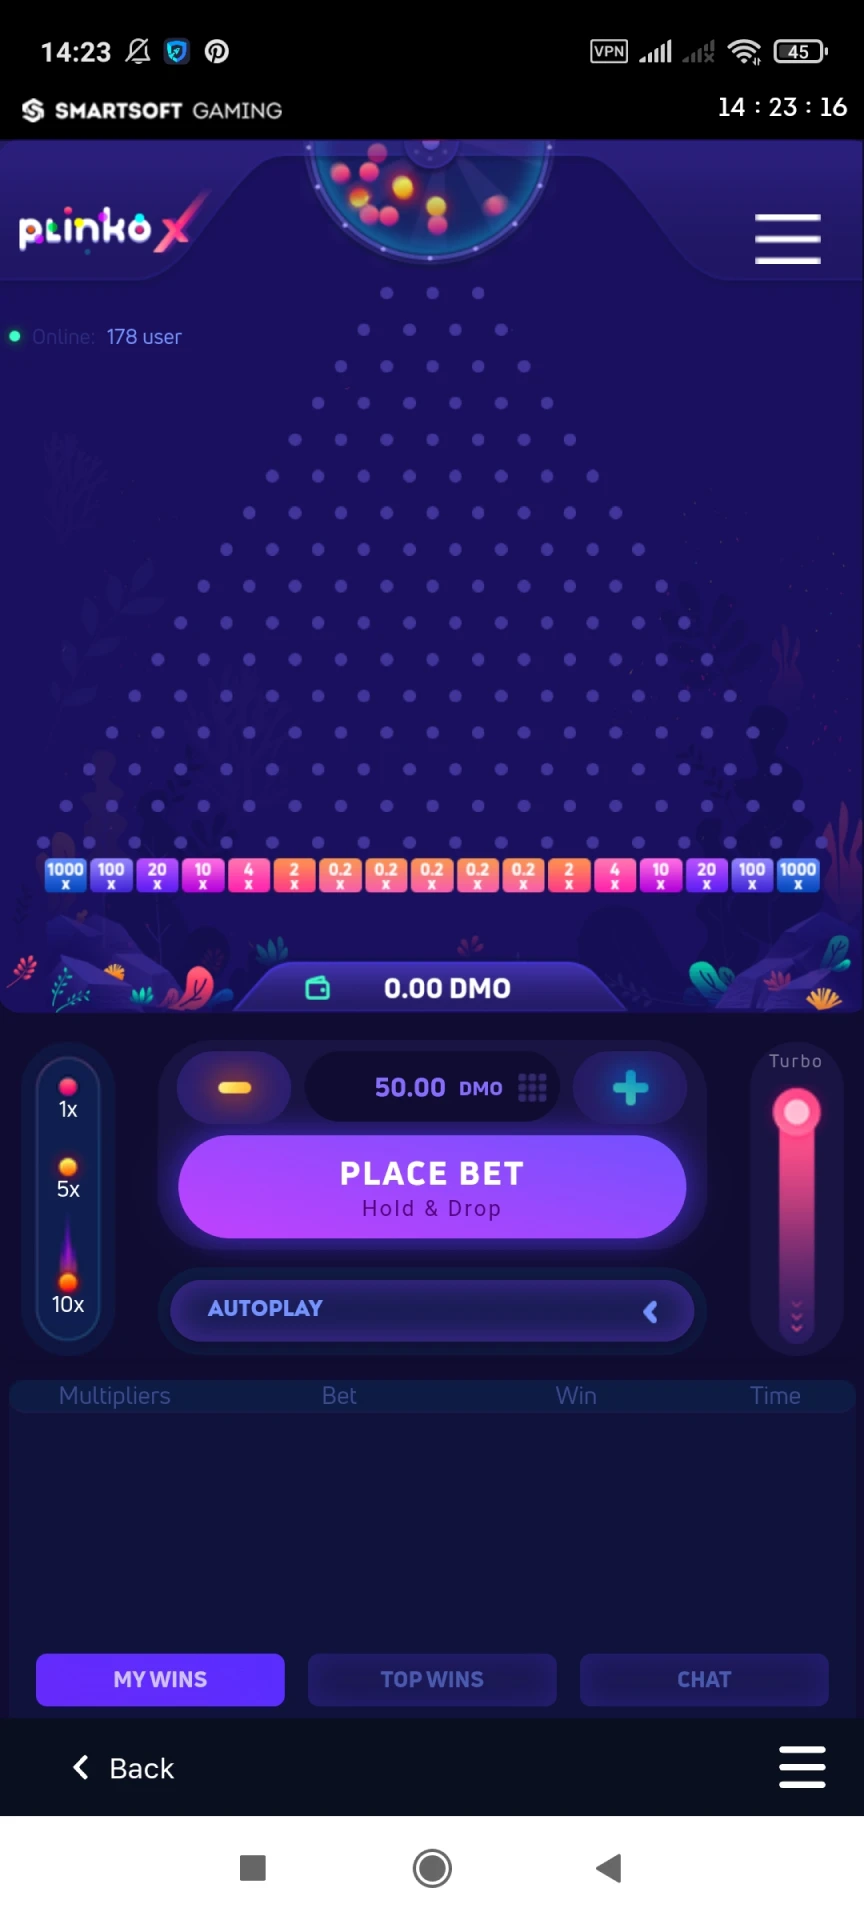 You can look at the Plinko X game interface.